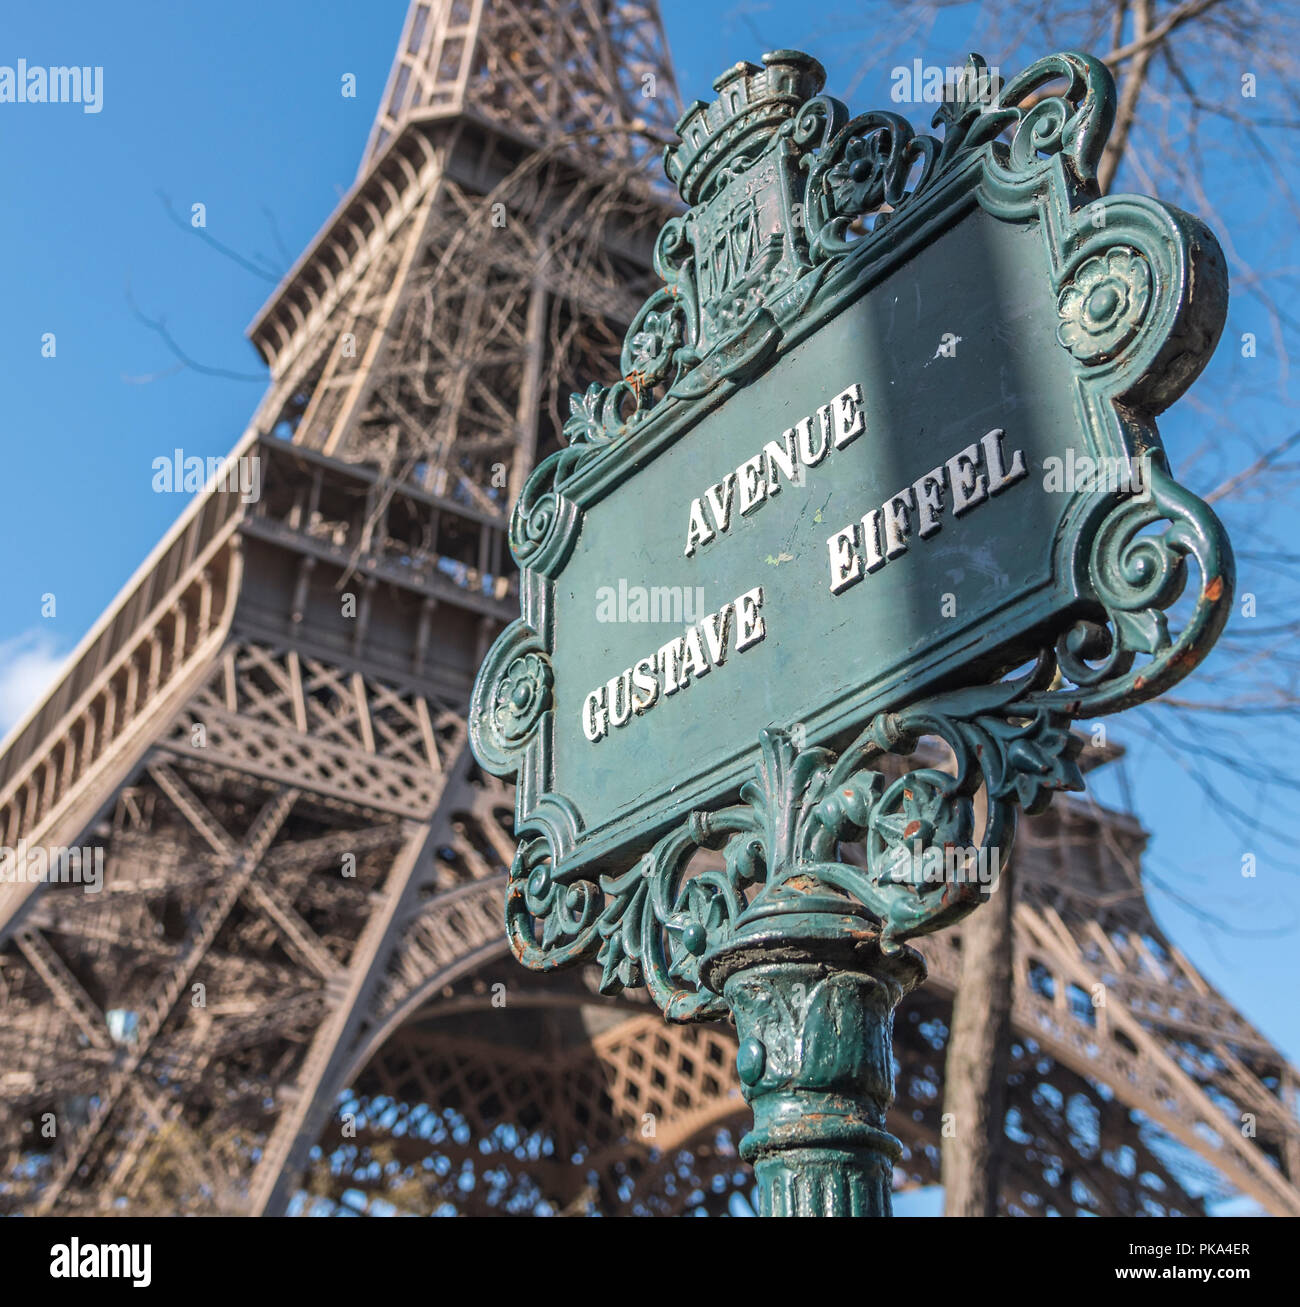 Avenue Gustave Eiffel street sign with the Eiffel Tower out of focus in the background. Stock Photo